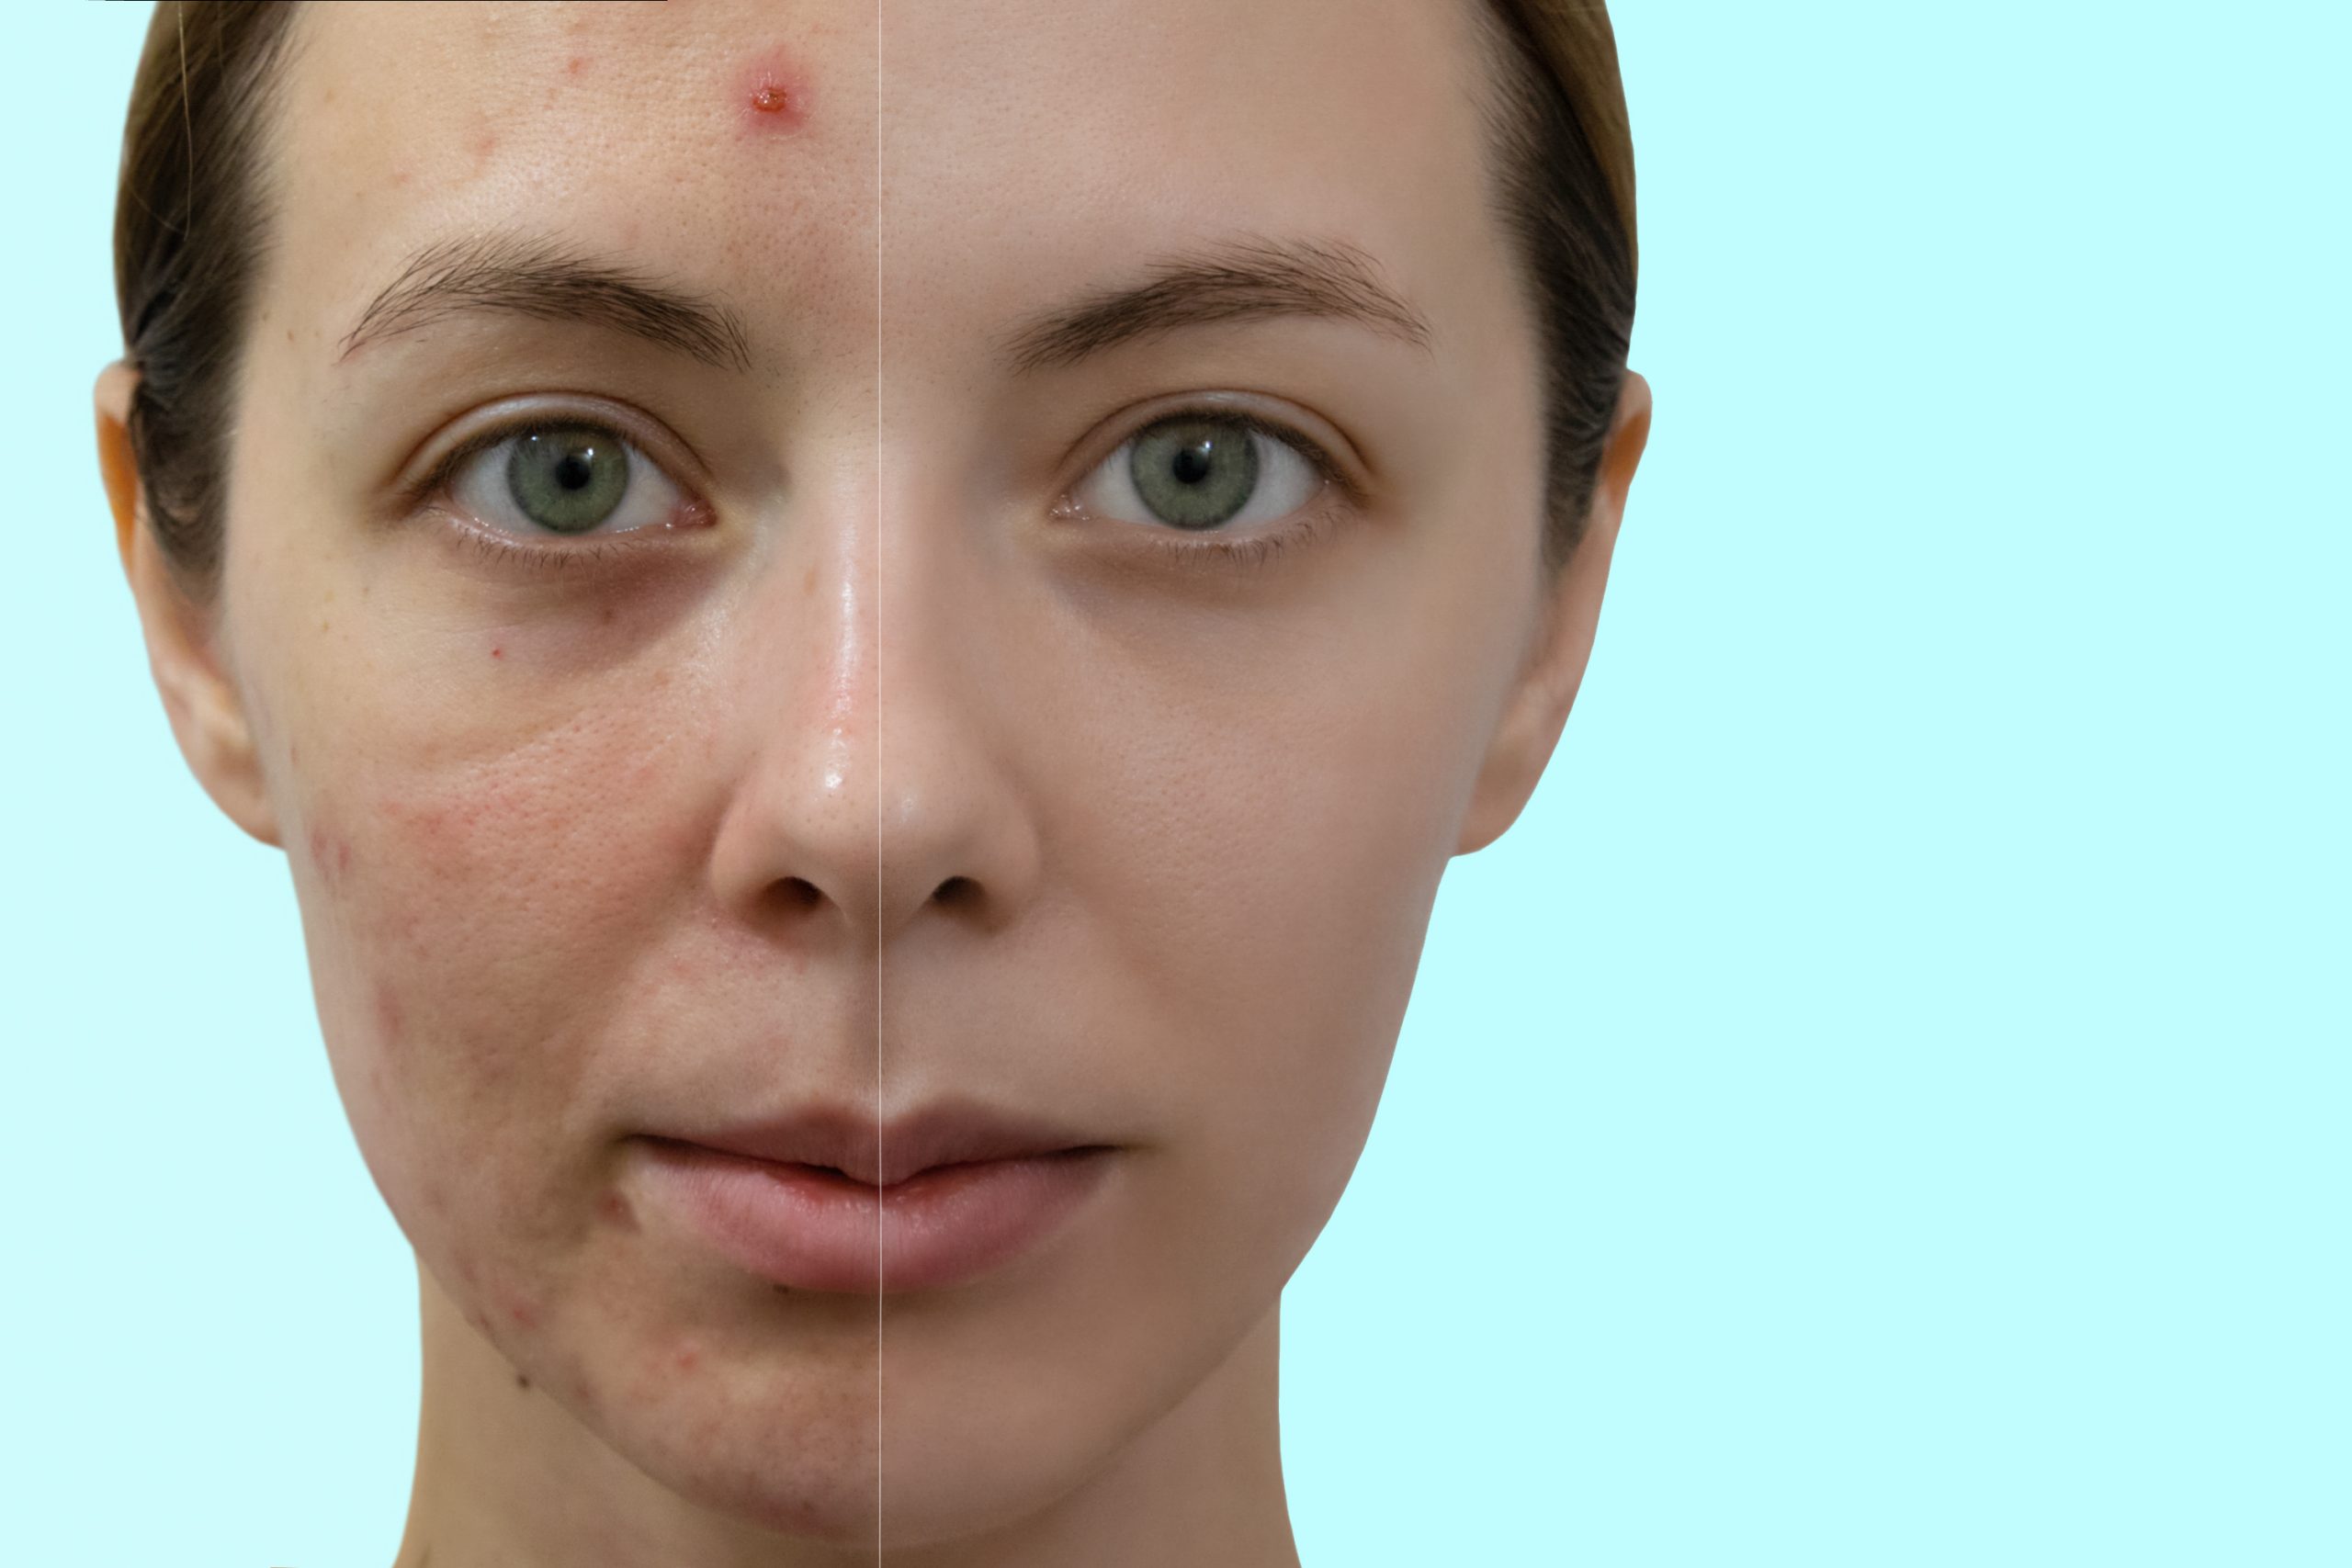 Comparison portrait of a woman with problematic skin without and with makeup.